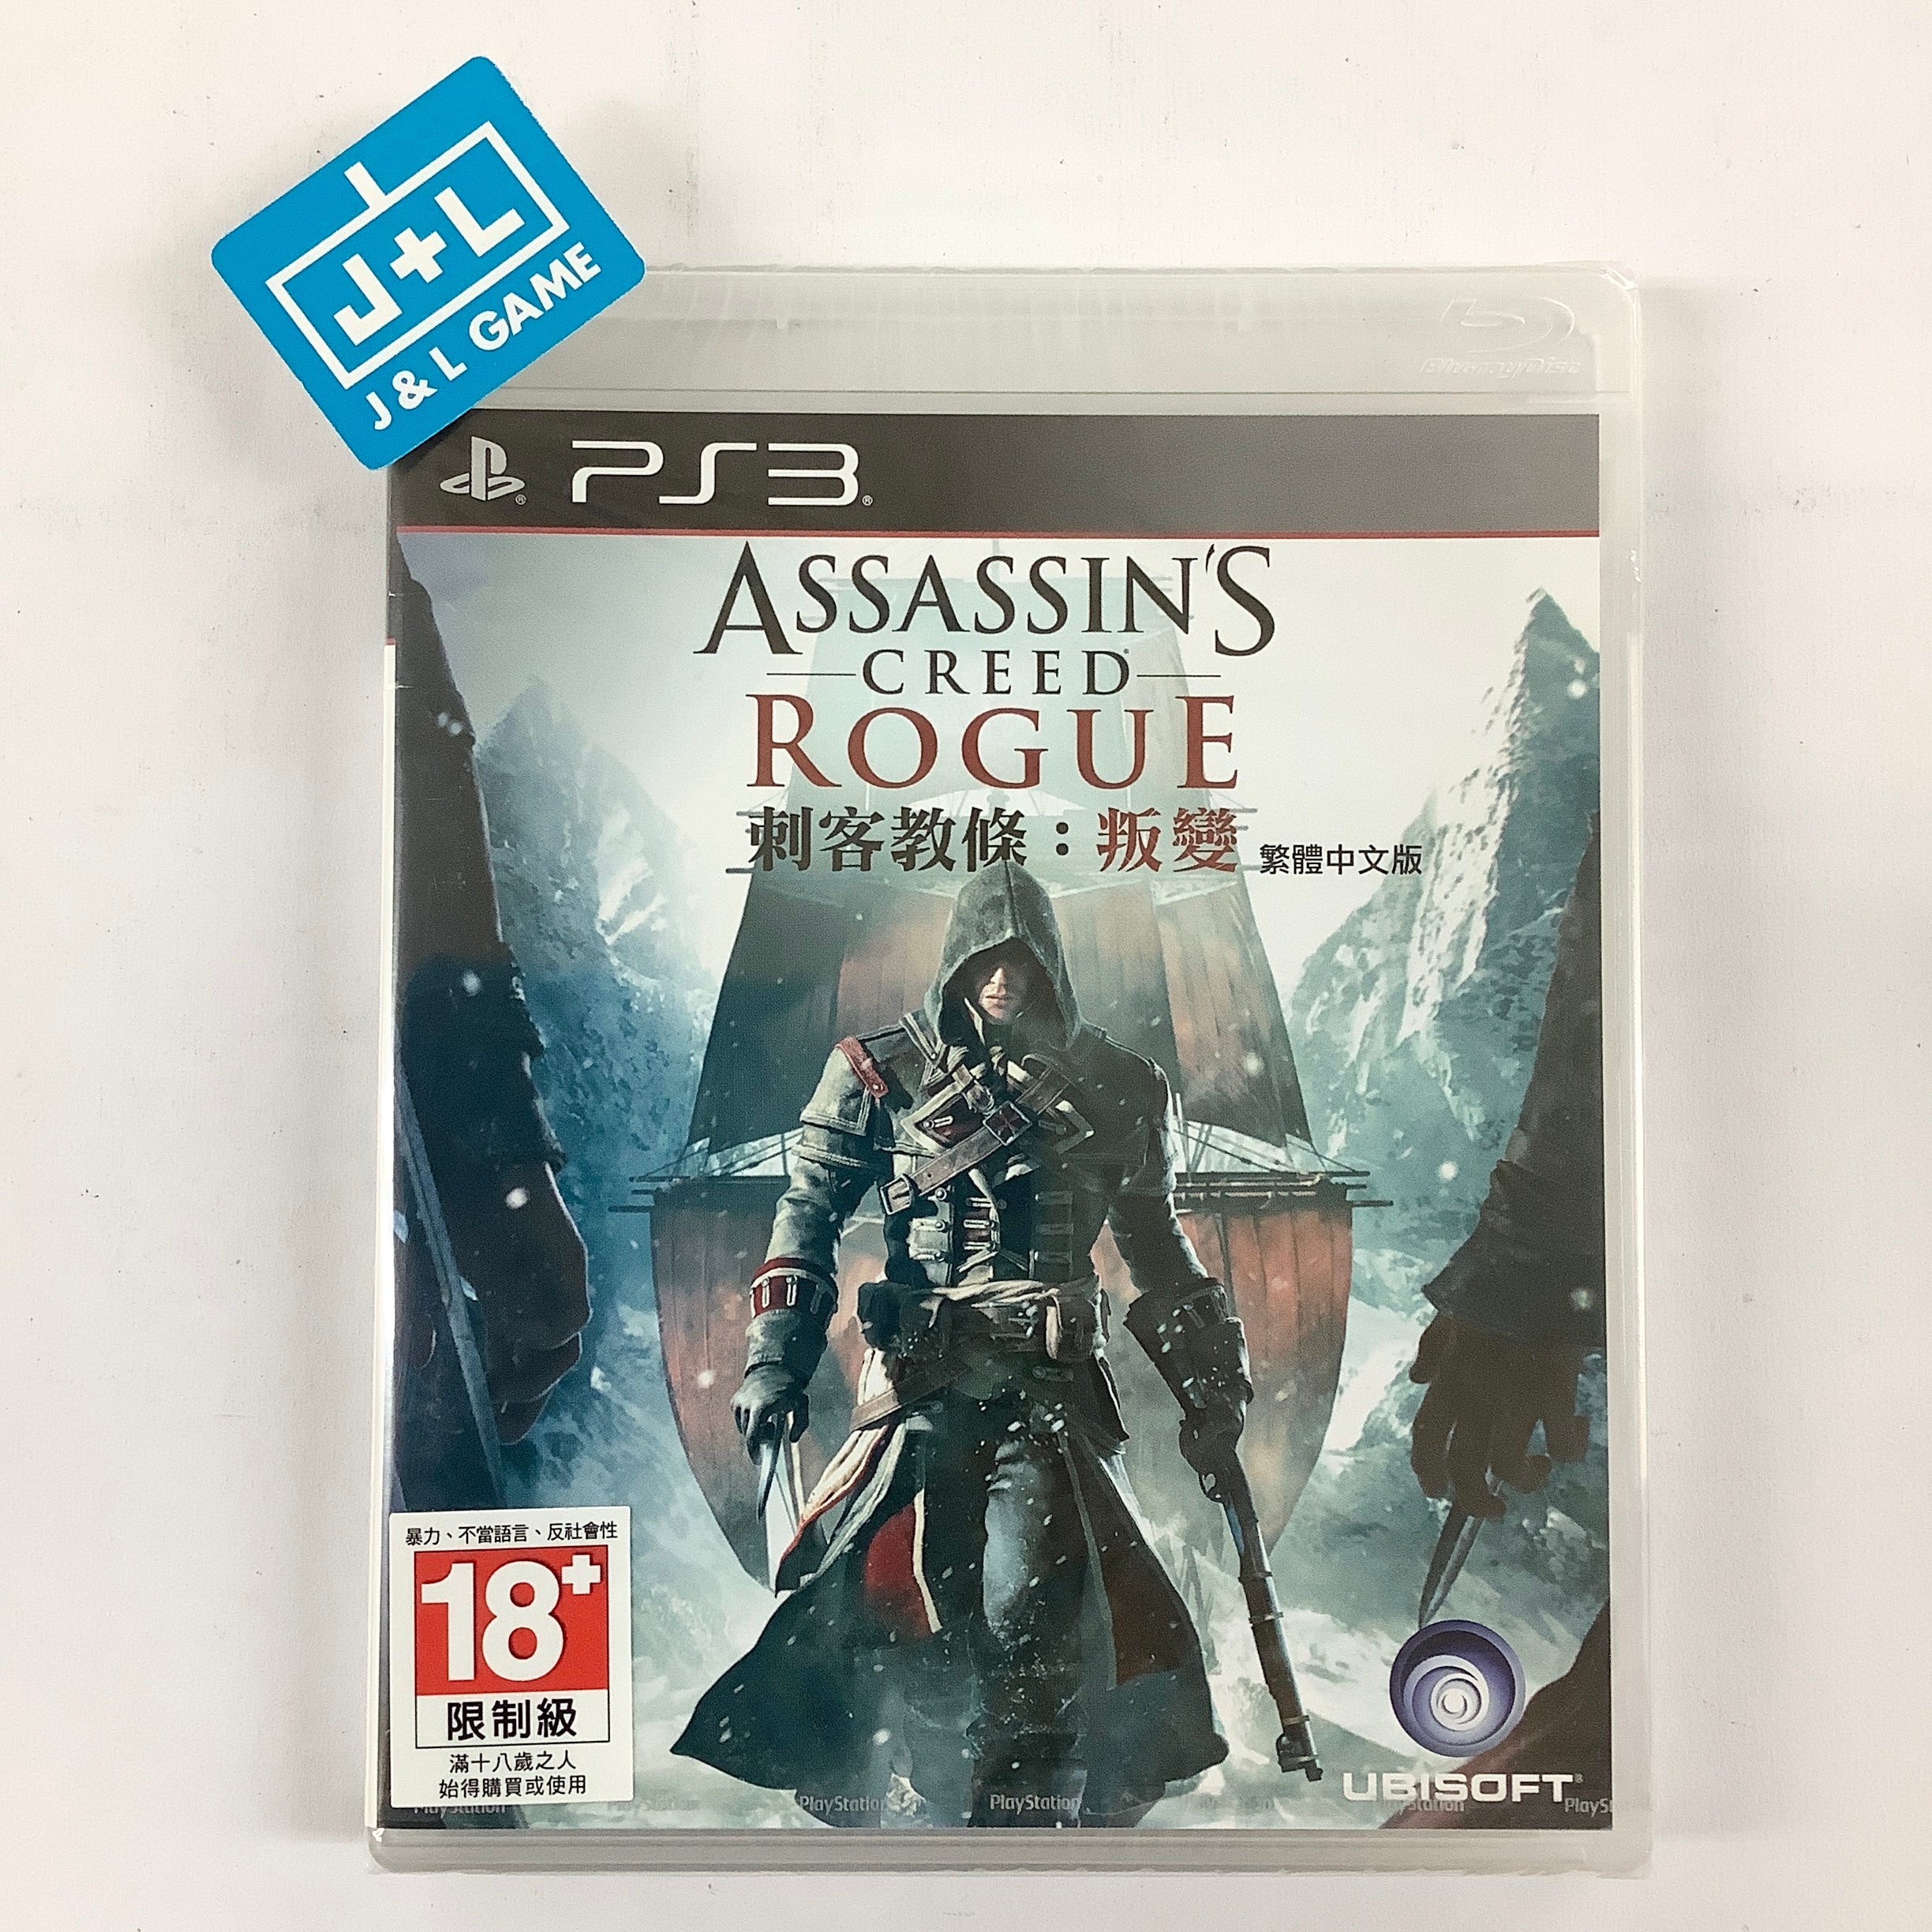 Assassin's Creed Rogue (Chinese Subtitles) - (PS3) PlayStation 3 (Asia Import) Video Games Ubisoft   